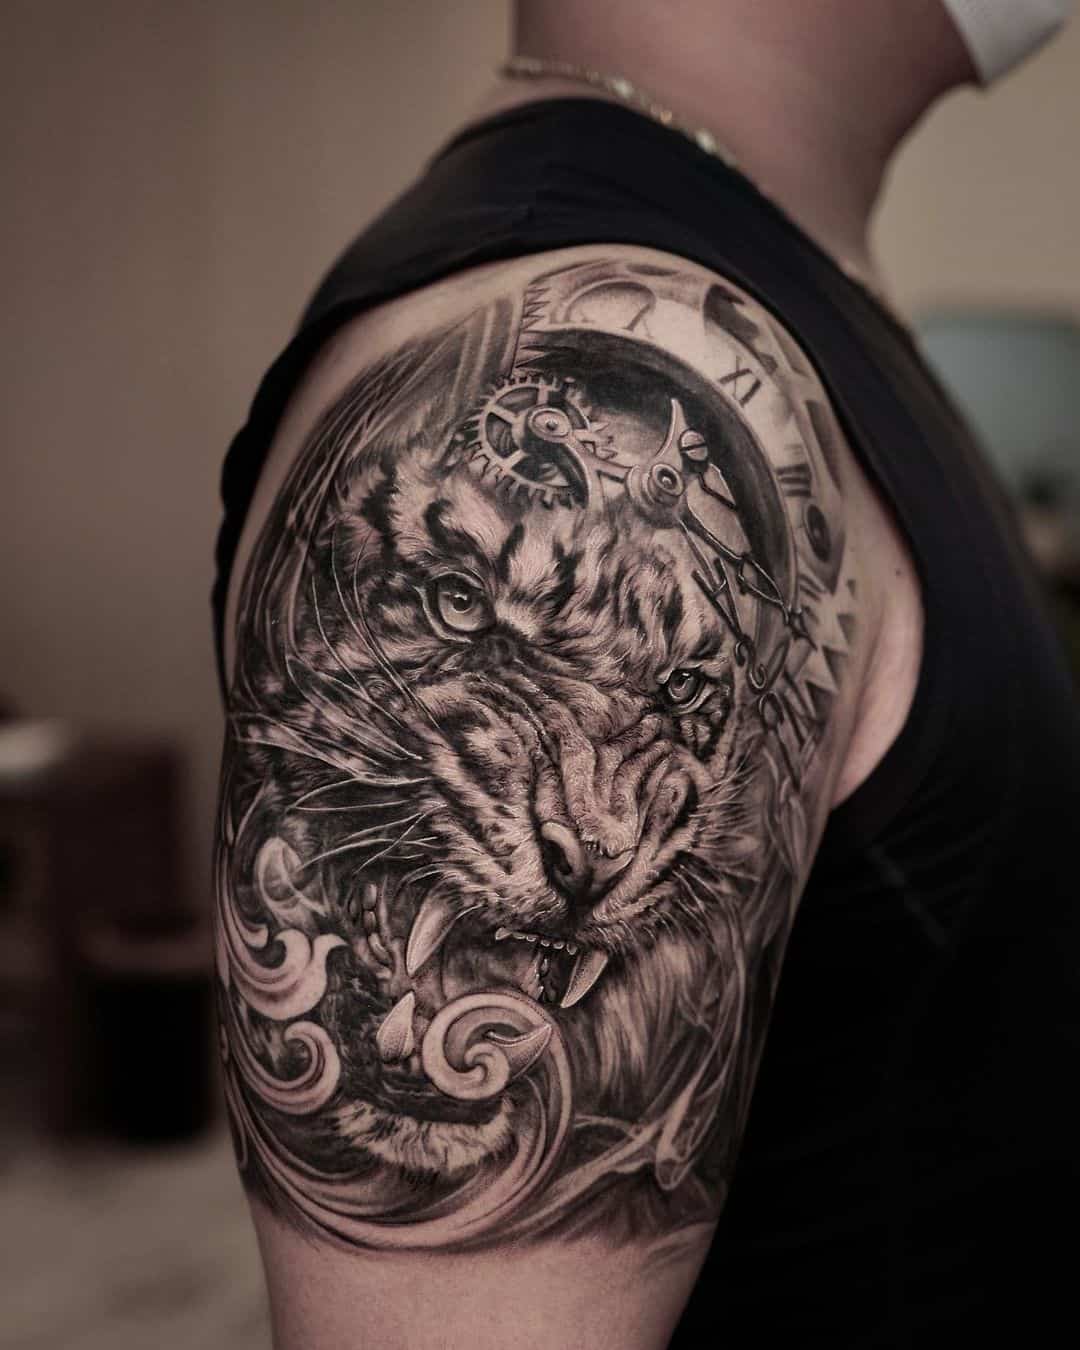 Arm Realistic Tiger Tattoo by Fontecha Iron